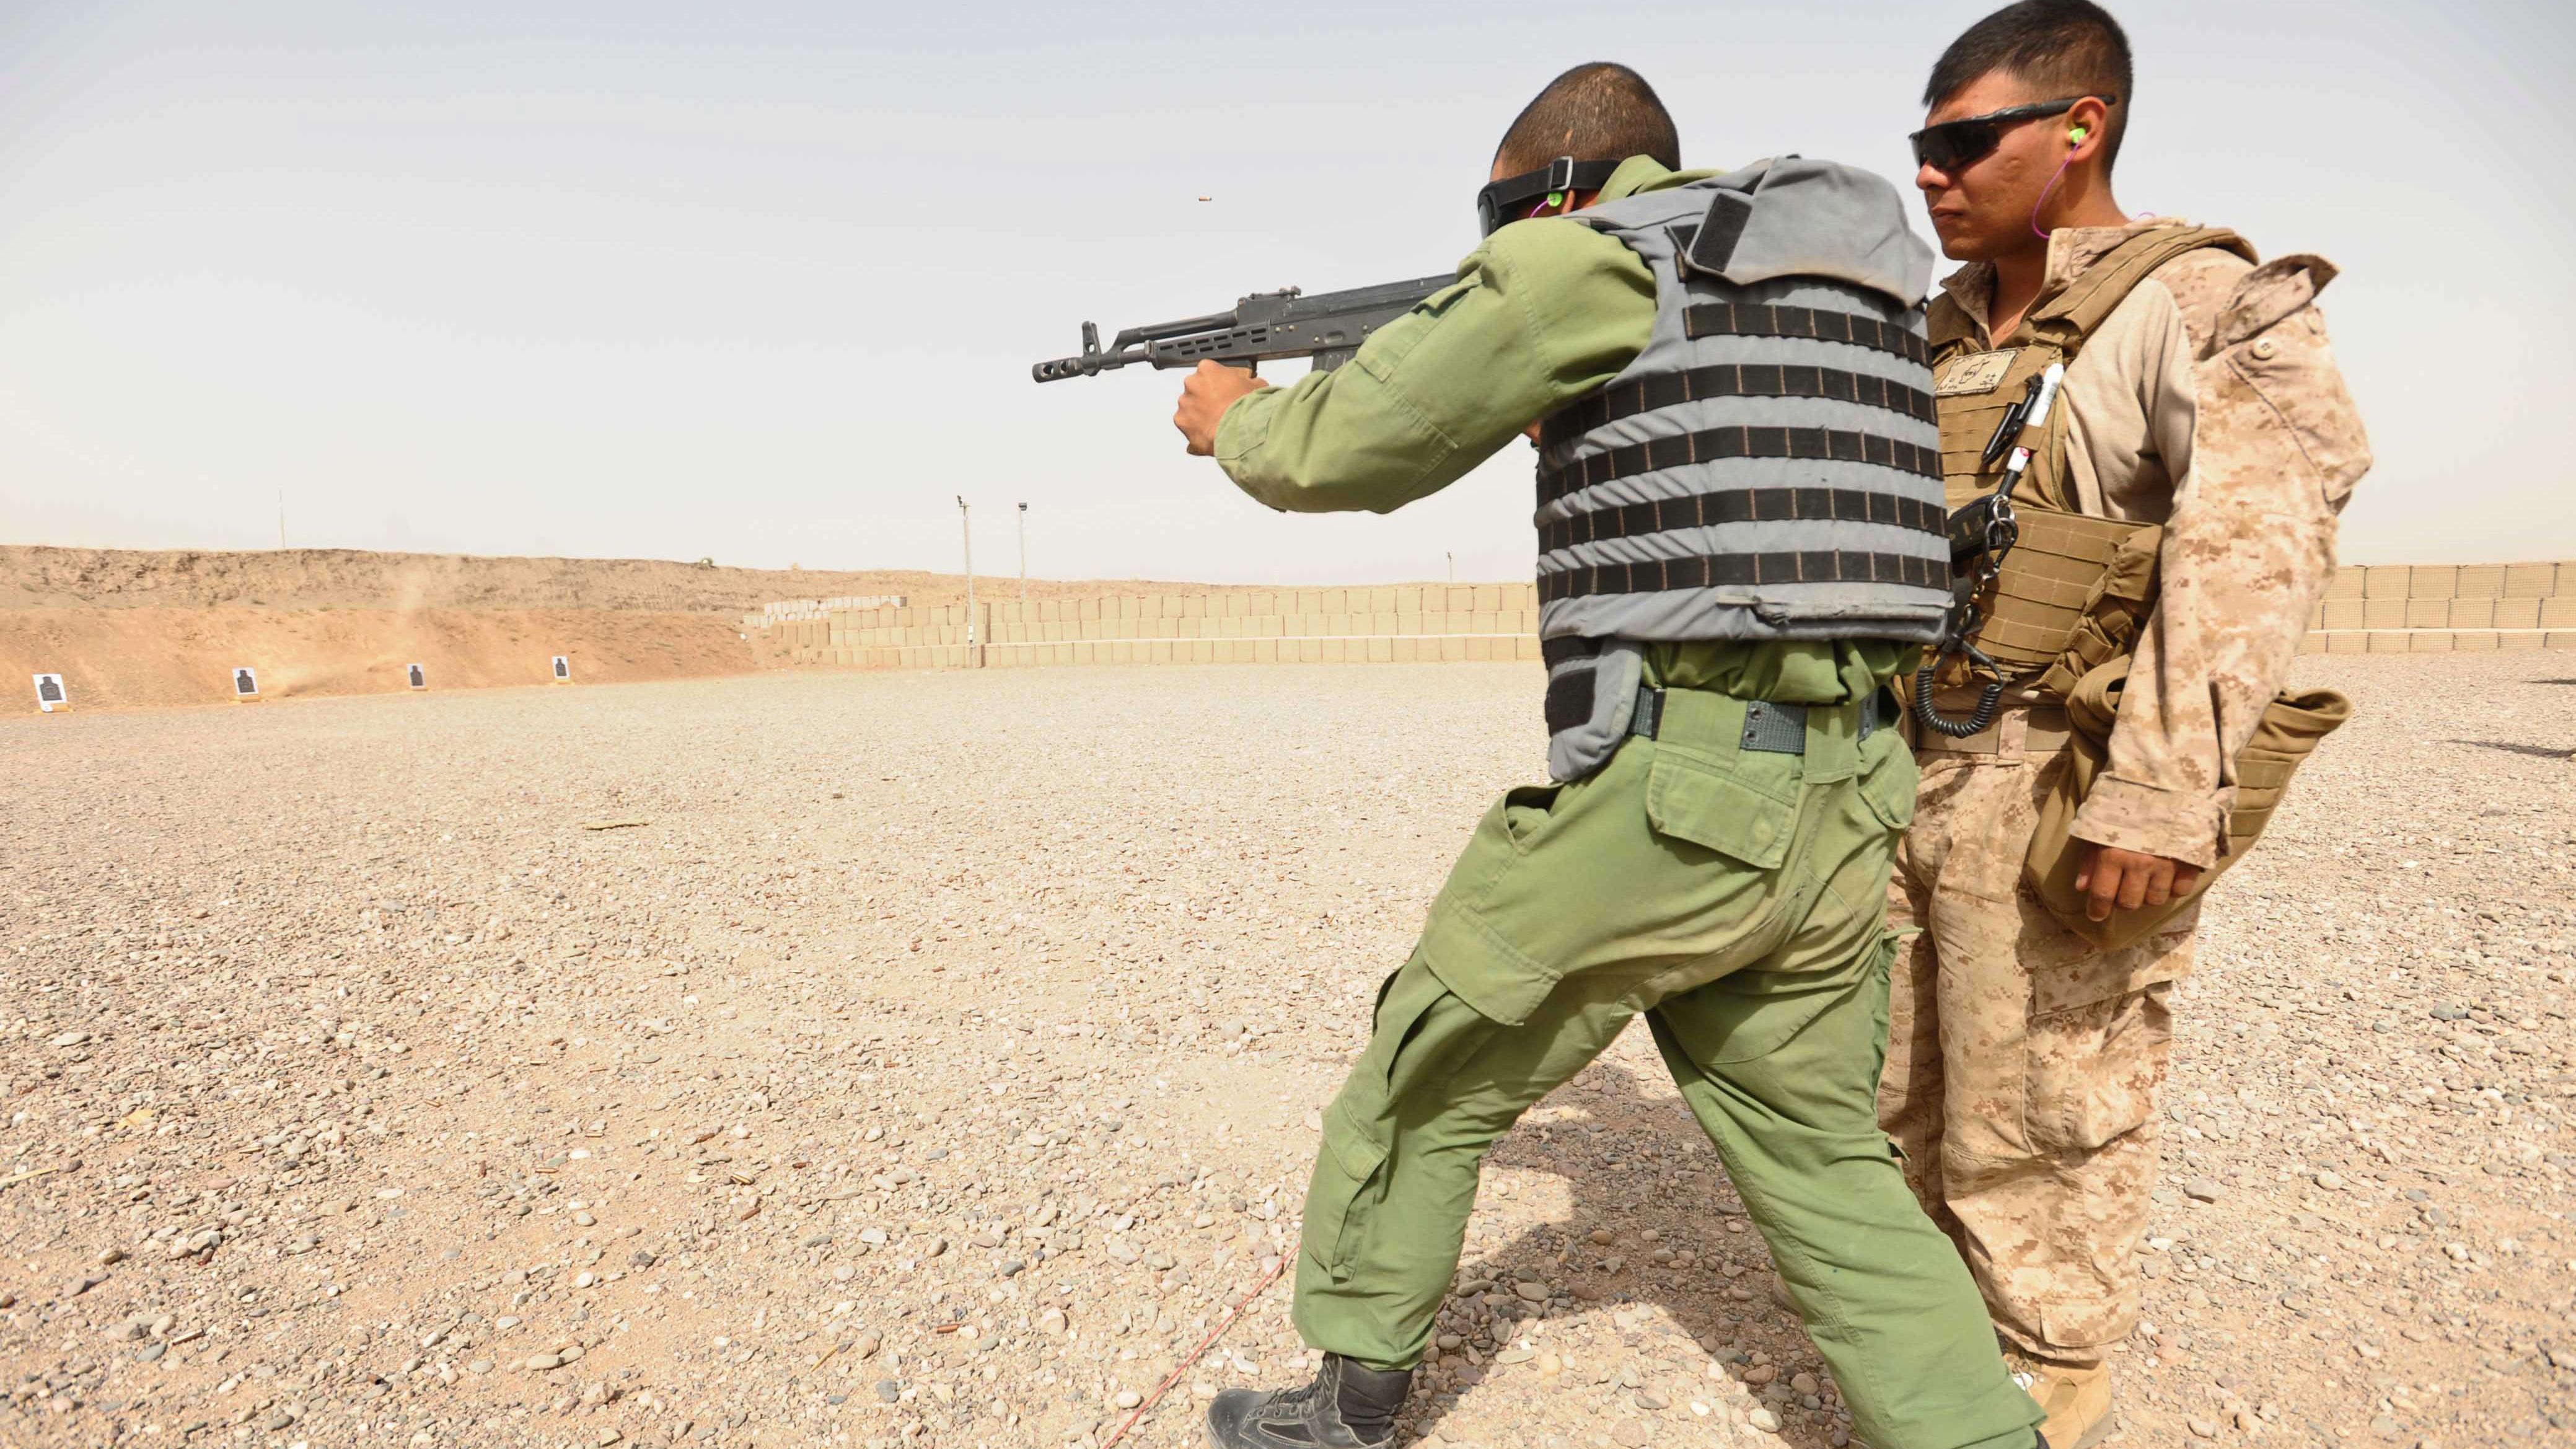 An Afghan police trainee practices shooting as a U.S. Marine looks on at Adraskan Police Training Center on July 15, 2011.